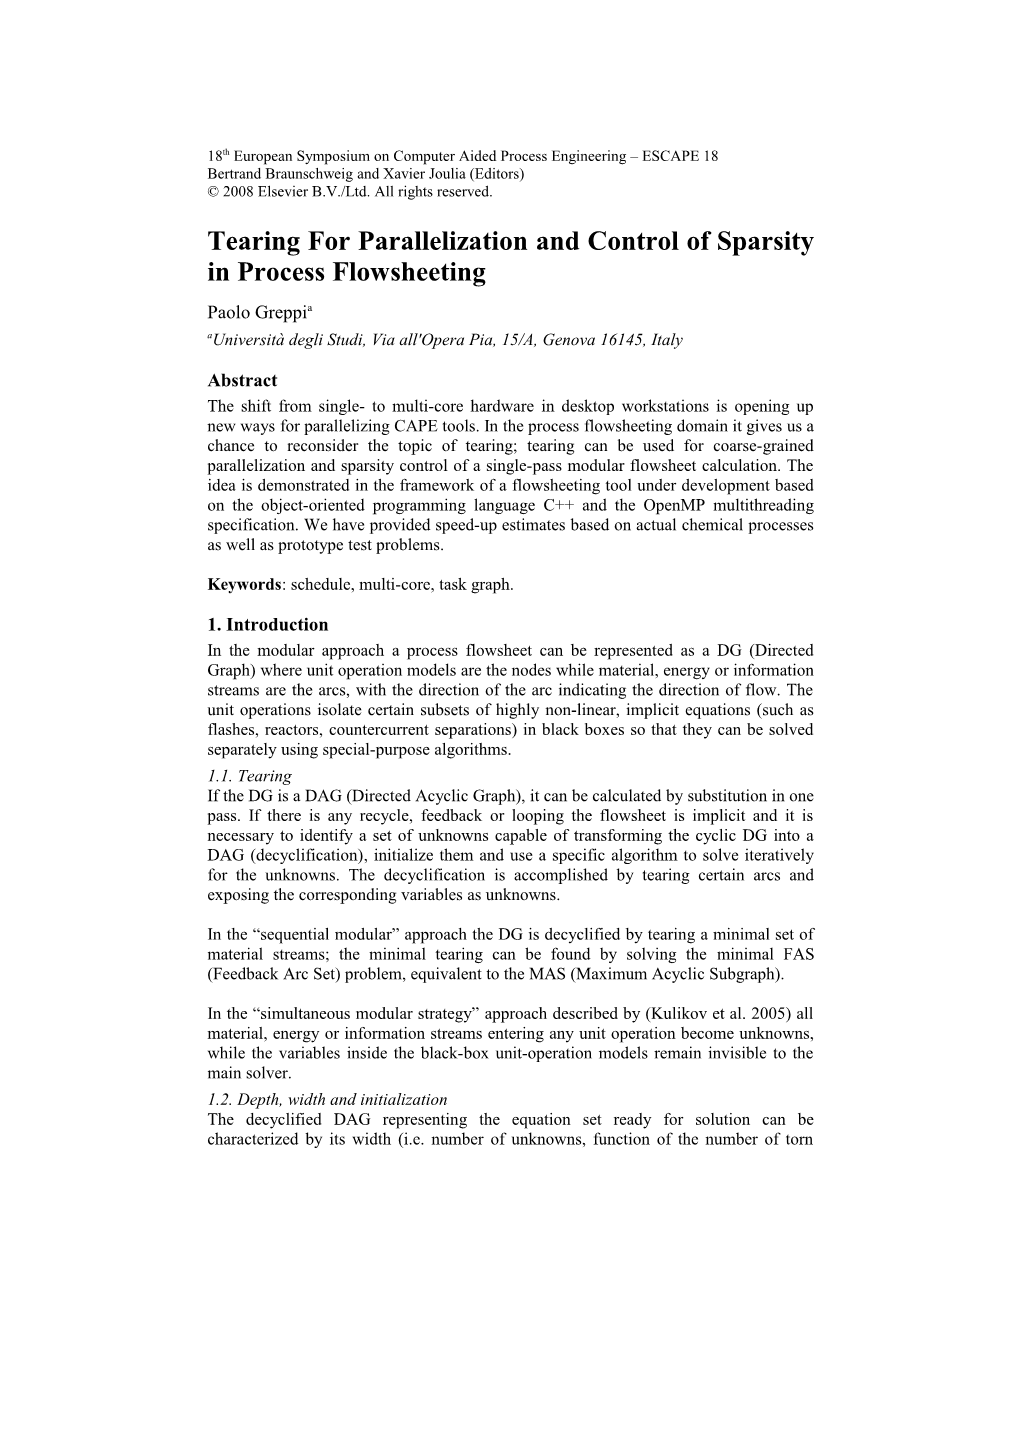 Tearing for Parallelization and Control of Sparsity in Process Flowsheeting